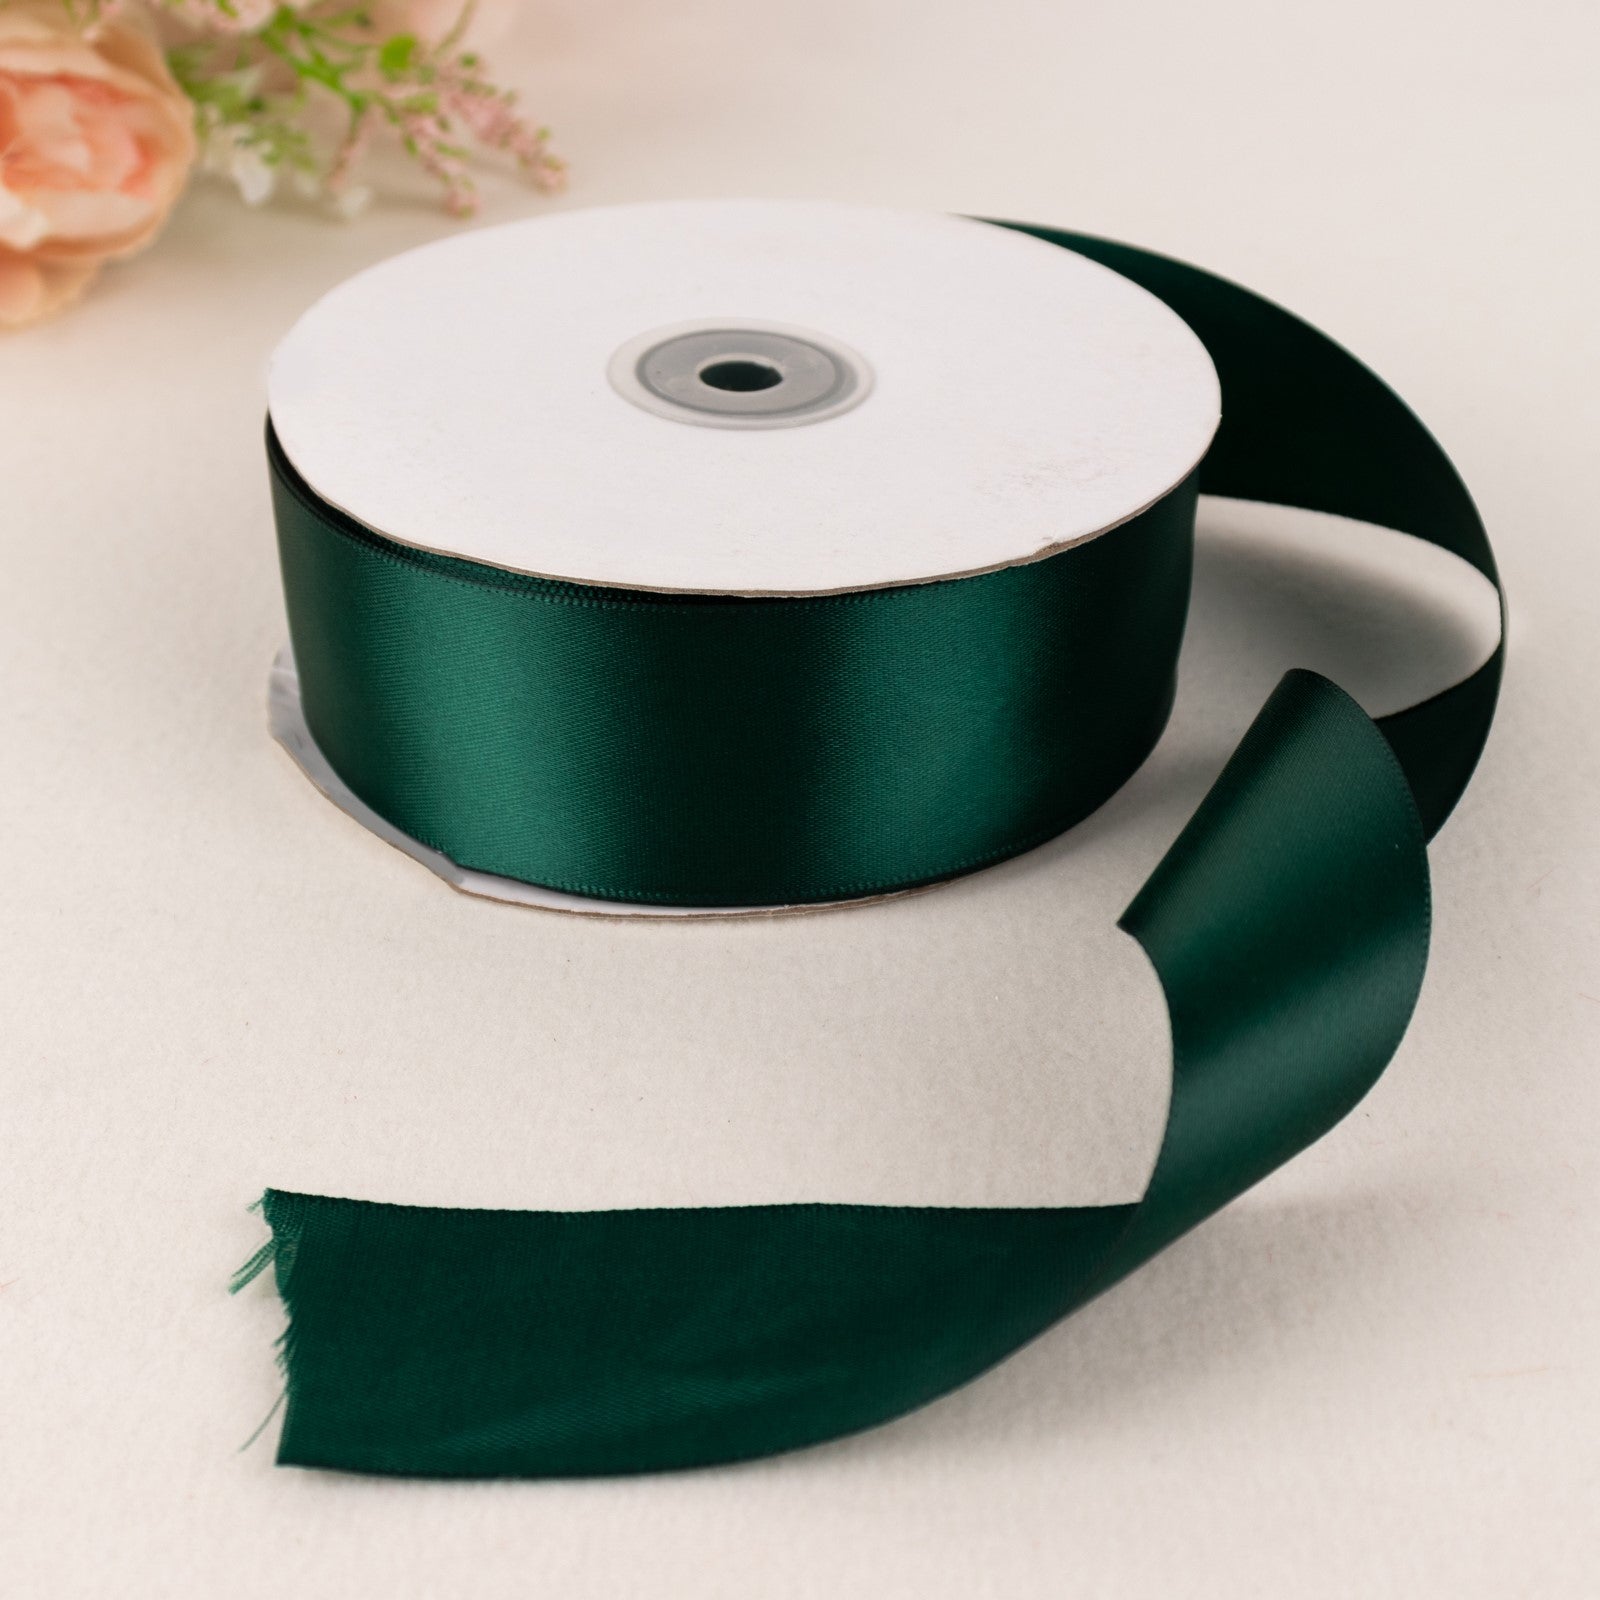 Efavormart 1 1/2 inch Satin Ribbon for Gift Package Wrapping, Hair Bow Clips & Accessories Making Crafting Wedding Decoration-Hunter, Green